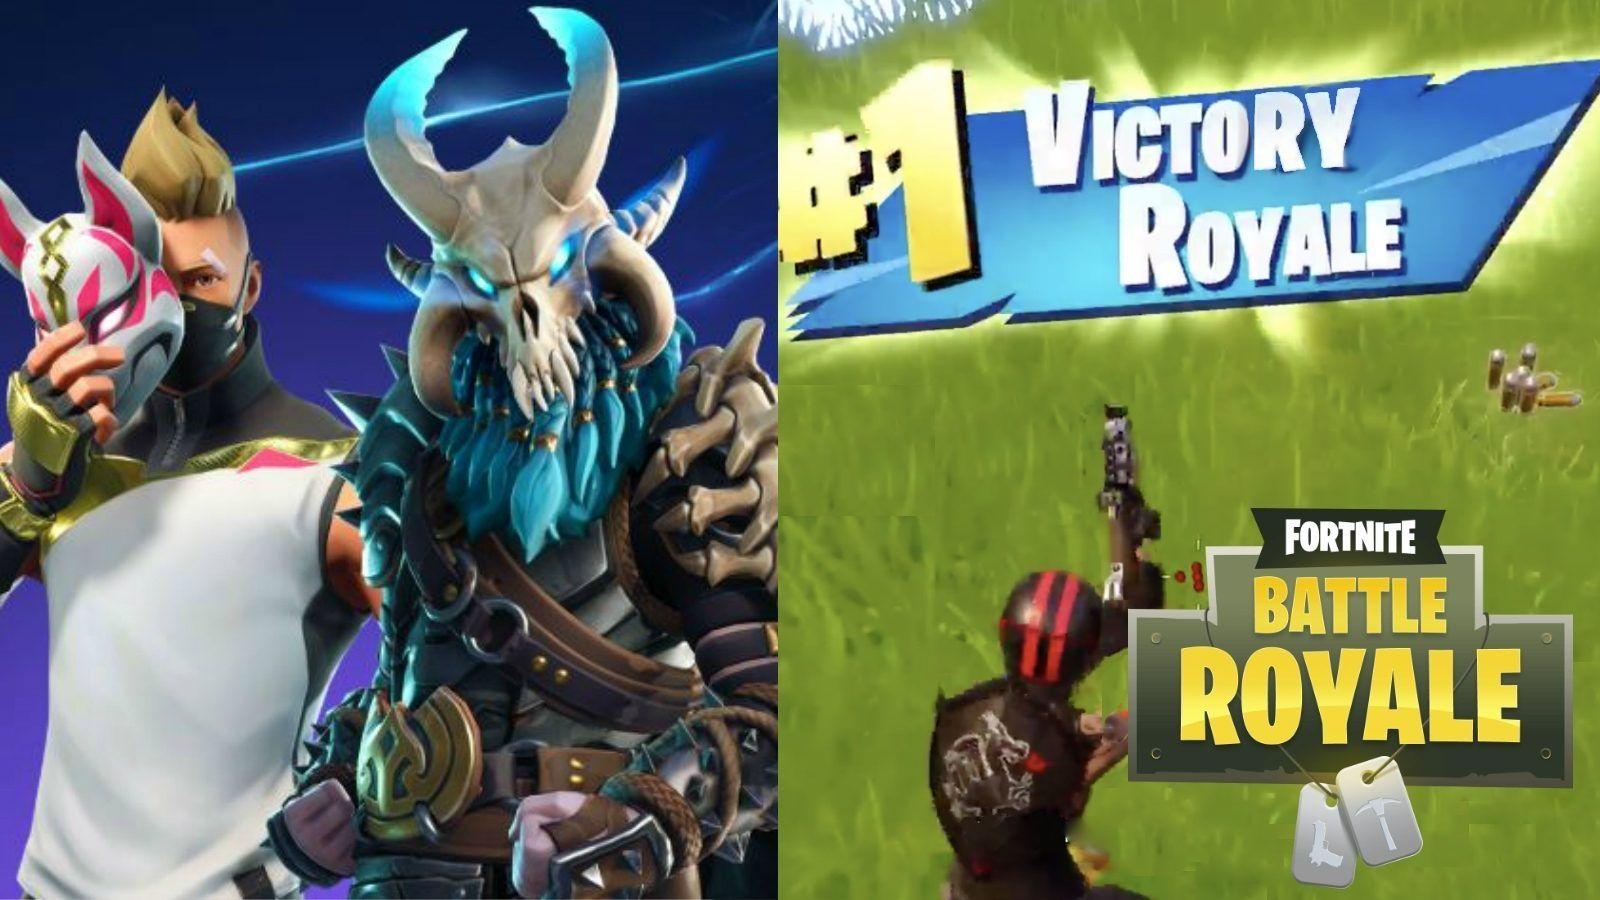 Fortnite Victory Royale Logo - Brand New Fortnite Victory Royale Screen and Slow-Mo Animation ...